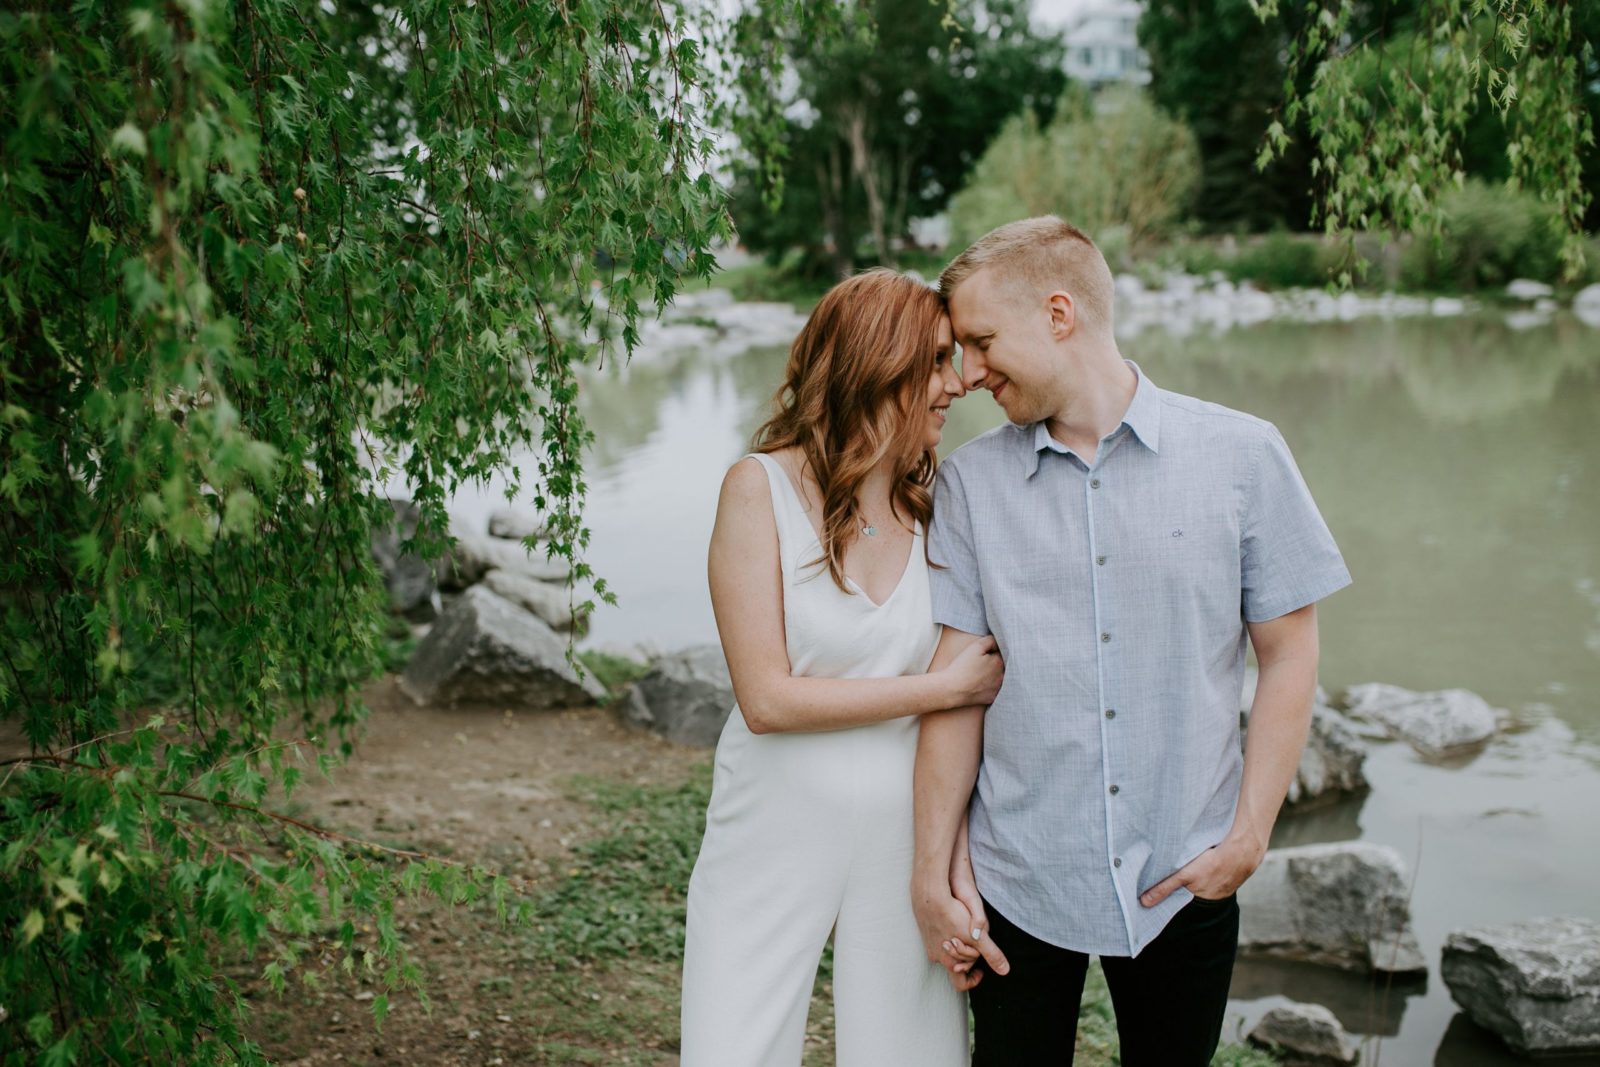 Engagement session inspiration by Deanna Rachel Photography